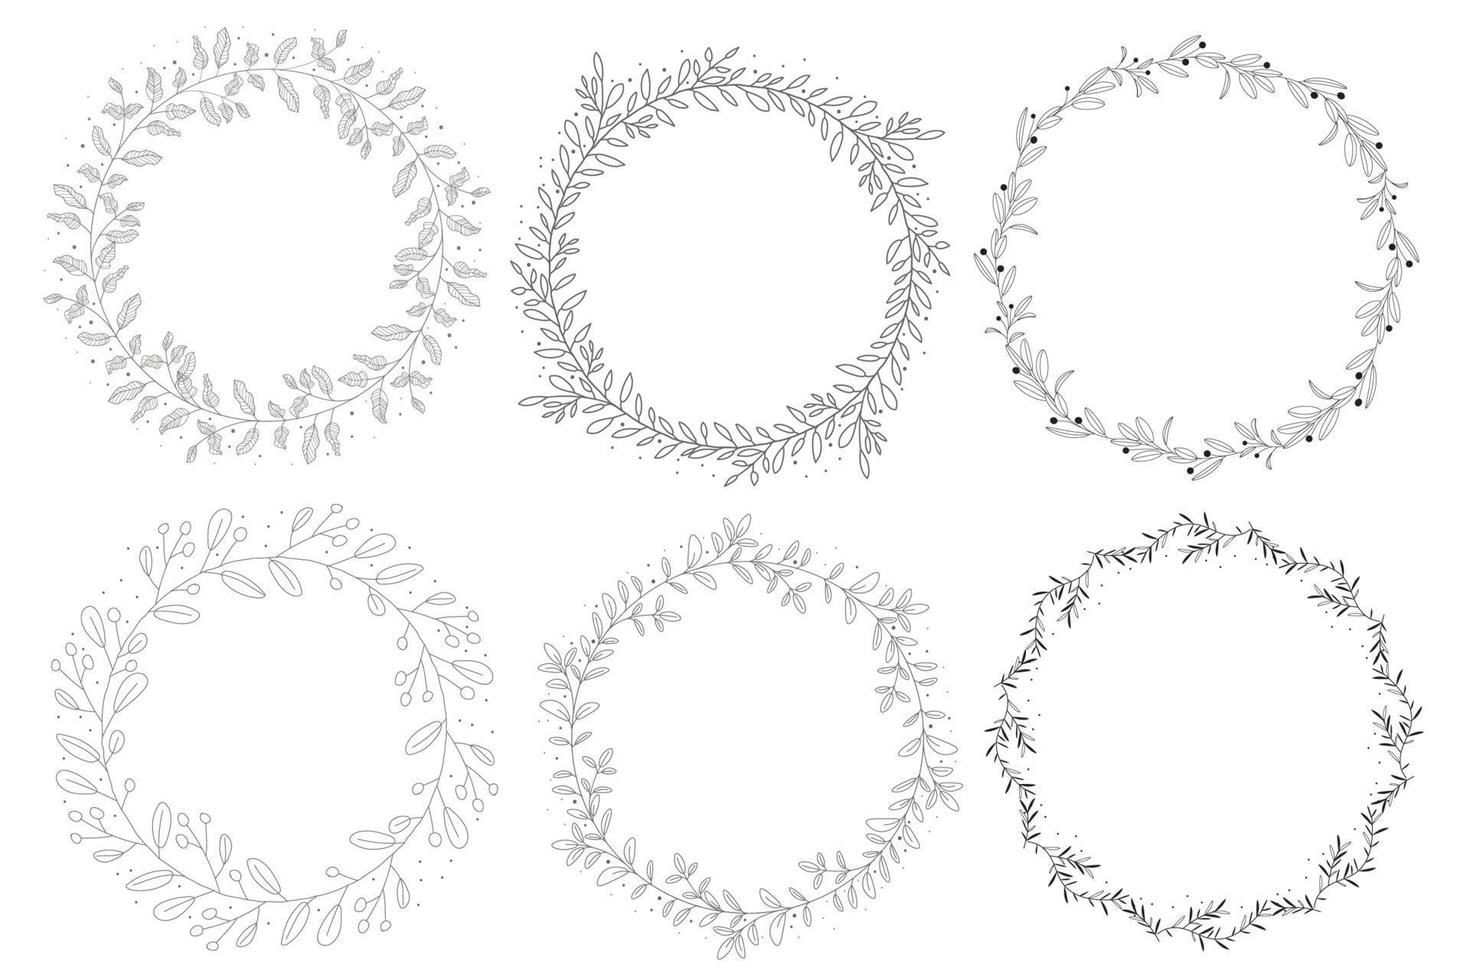 Doodle hand drawn natural autumn wreath collection vector